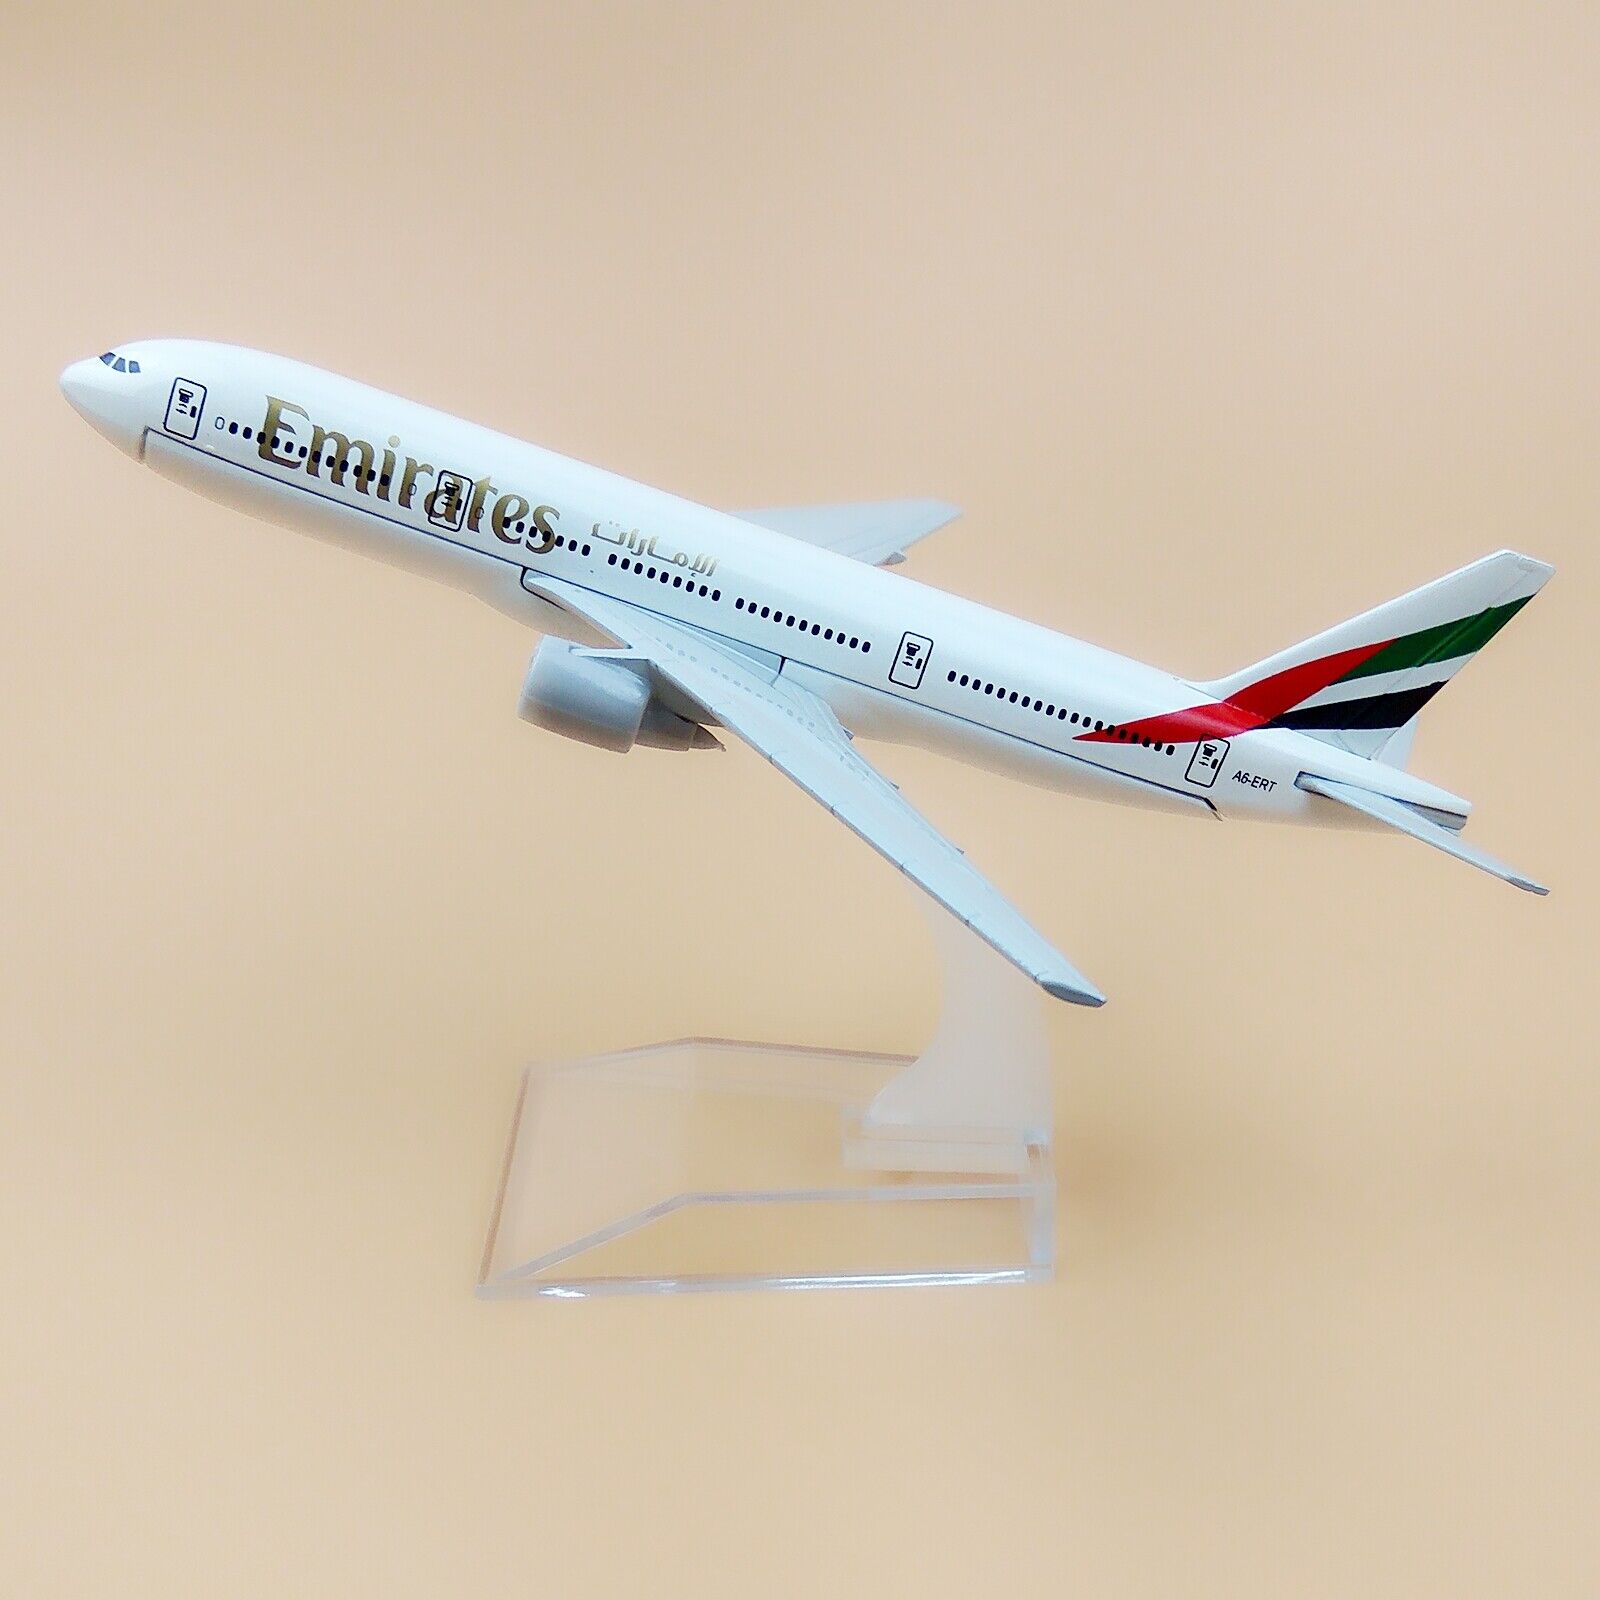 16cm Air Emirates Airlines Boeing B777 Diecast Airplane Model Plane Aircraft